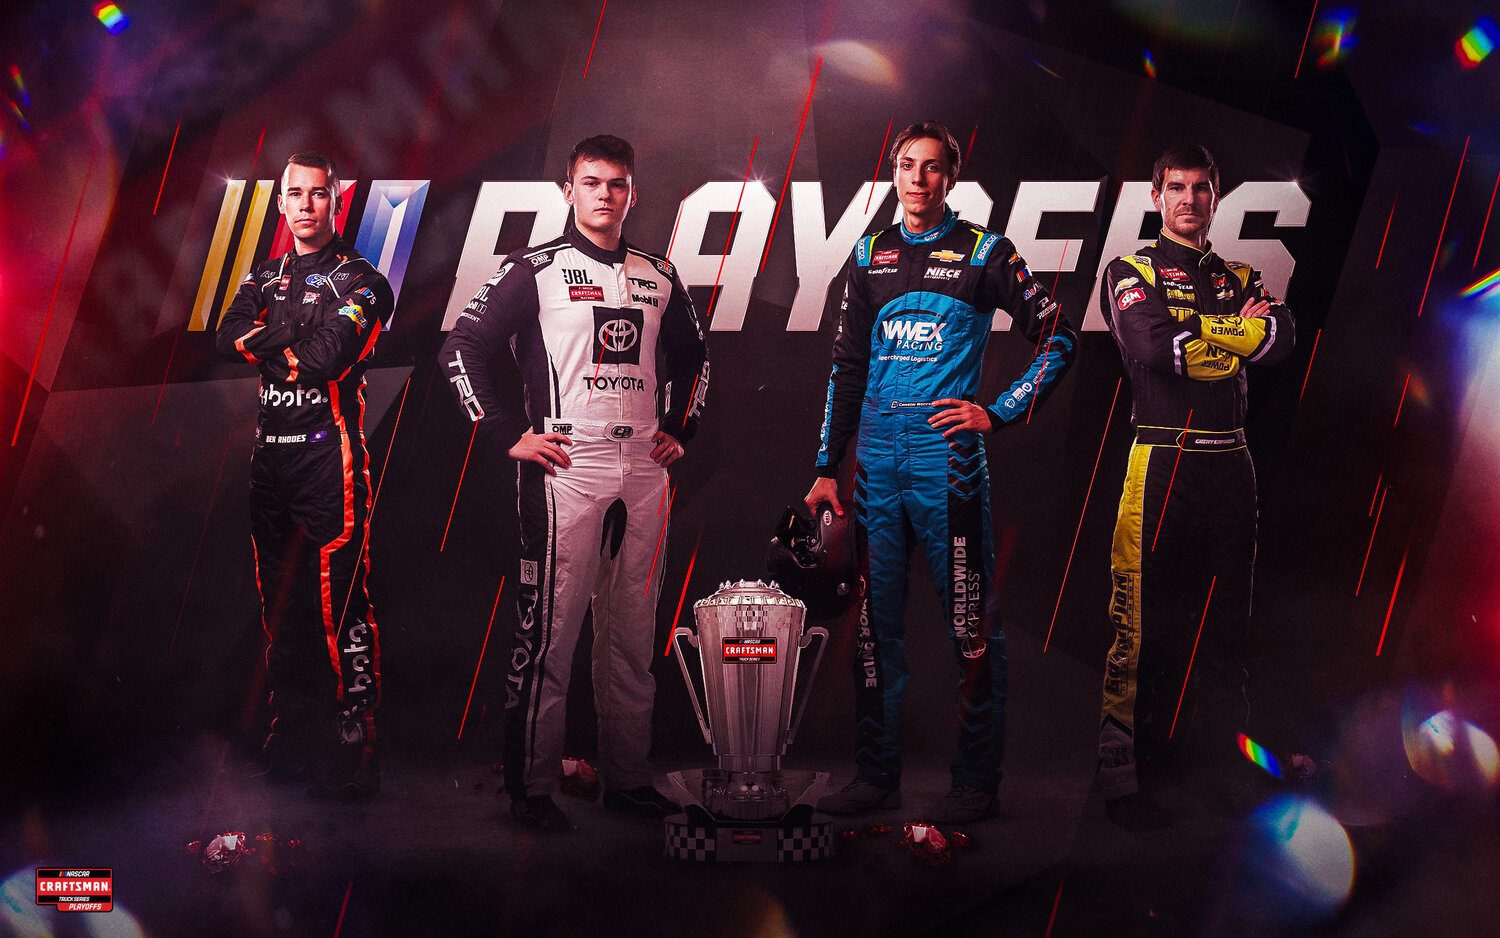 The Championship 4 field is set for Nov. 3’s NASCAR Truck Series finals at Phoenix Raceway. Ben Rhodes, Corey Heim, Carson Hocevar and Grant Enfinger will be racing with the trophy on the line next Friday night on FOX Sports 1.